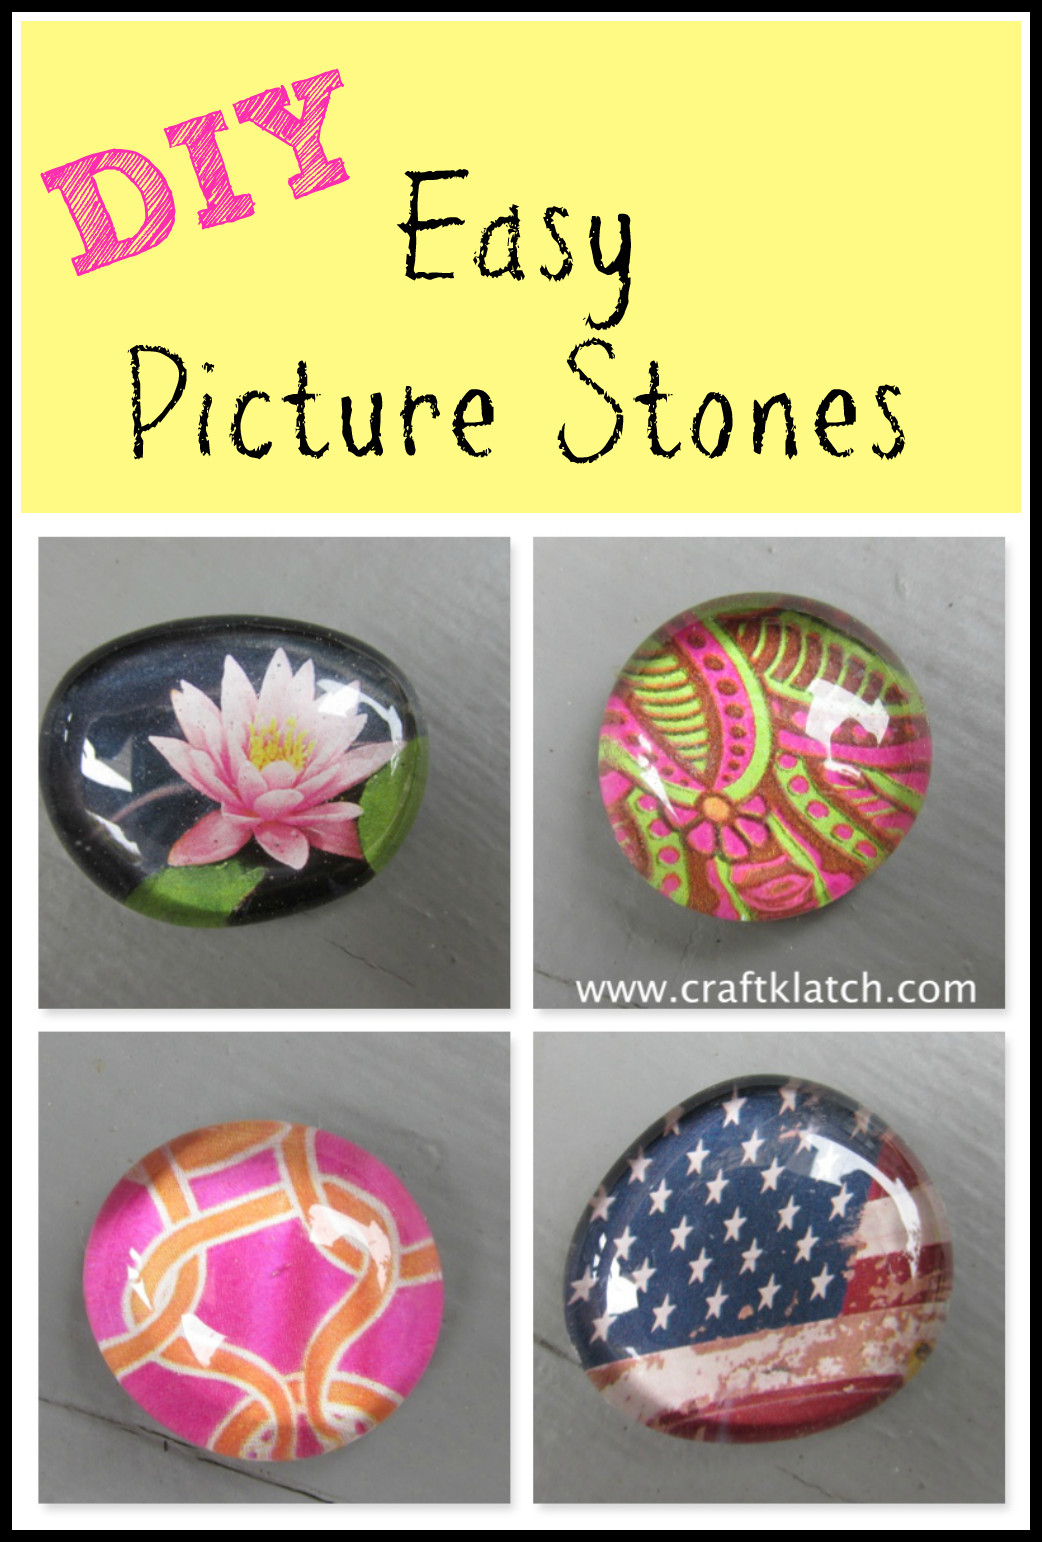 Easy Glass Picture Stone Magnets - Craft Klatch